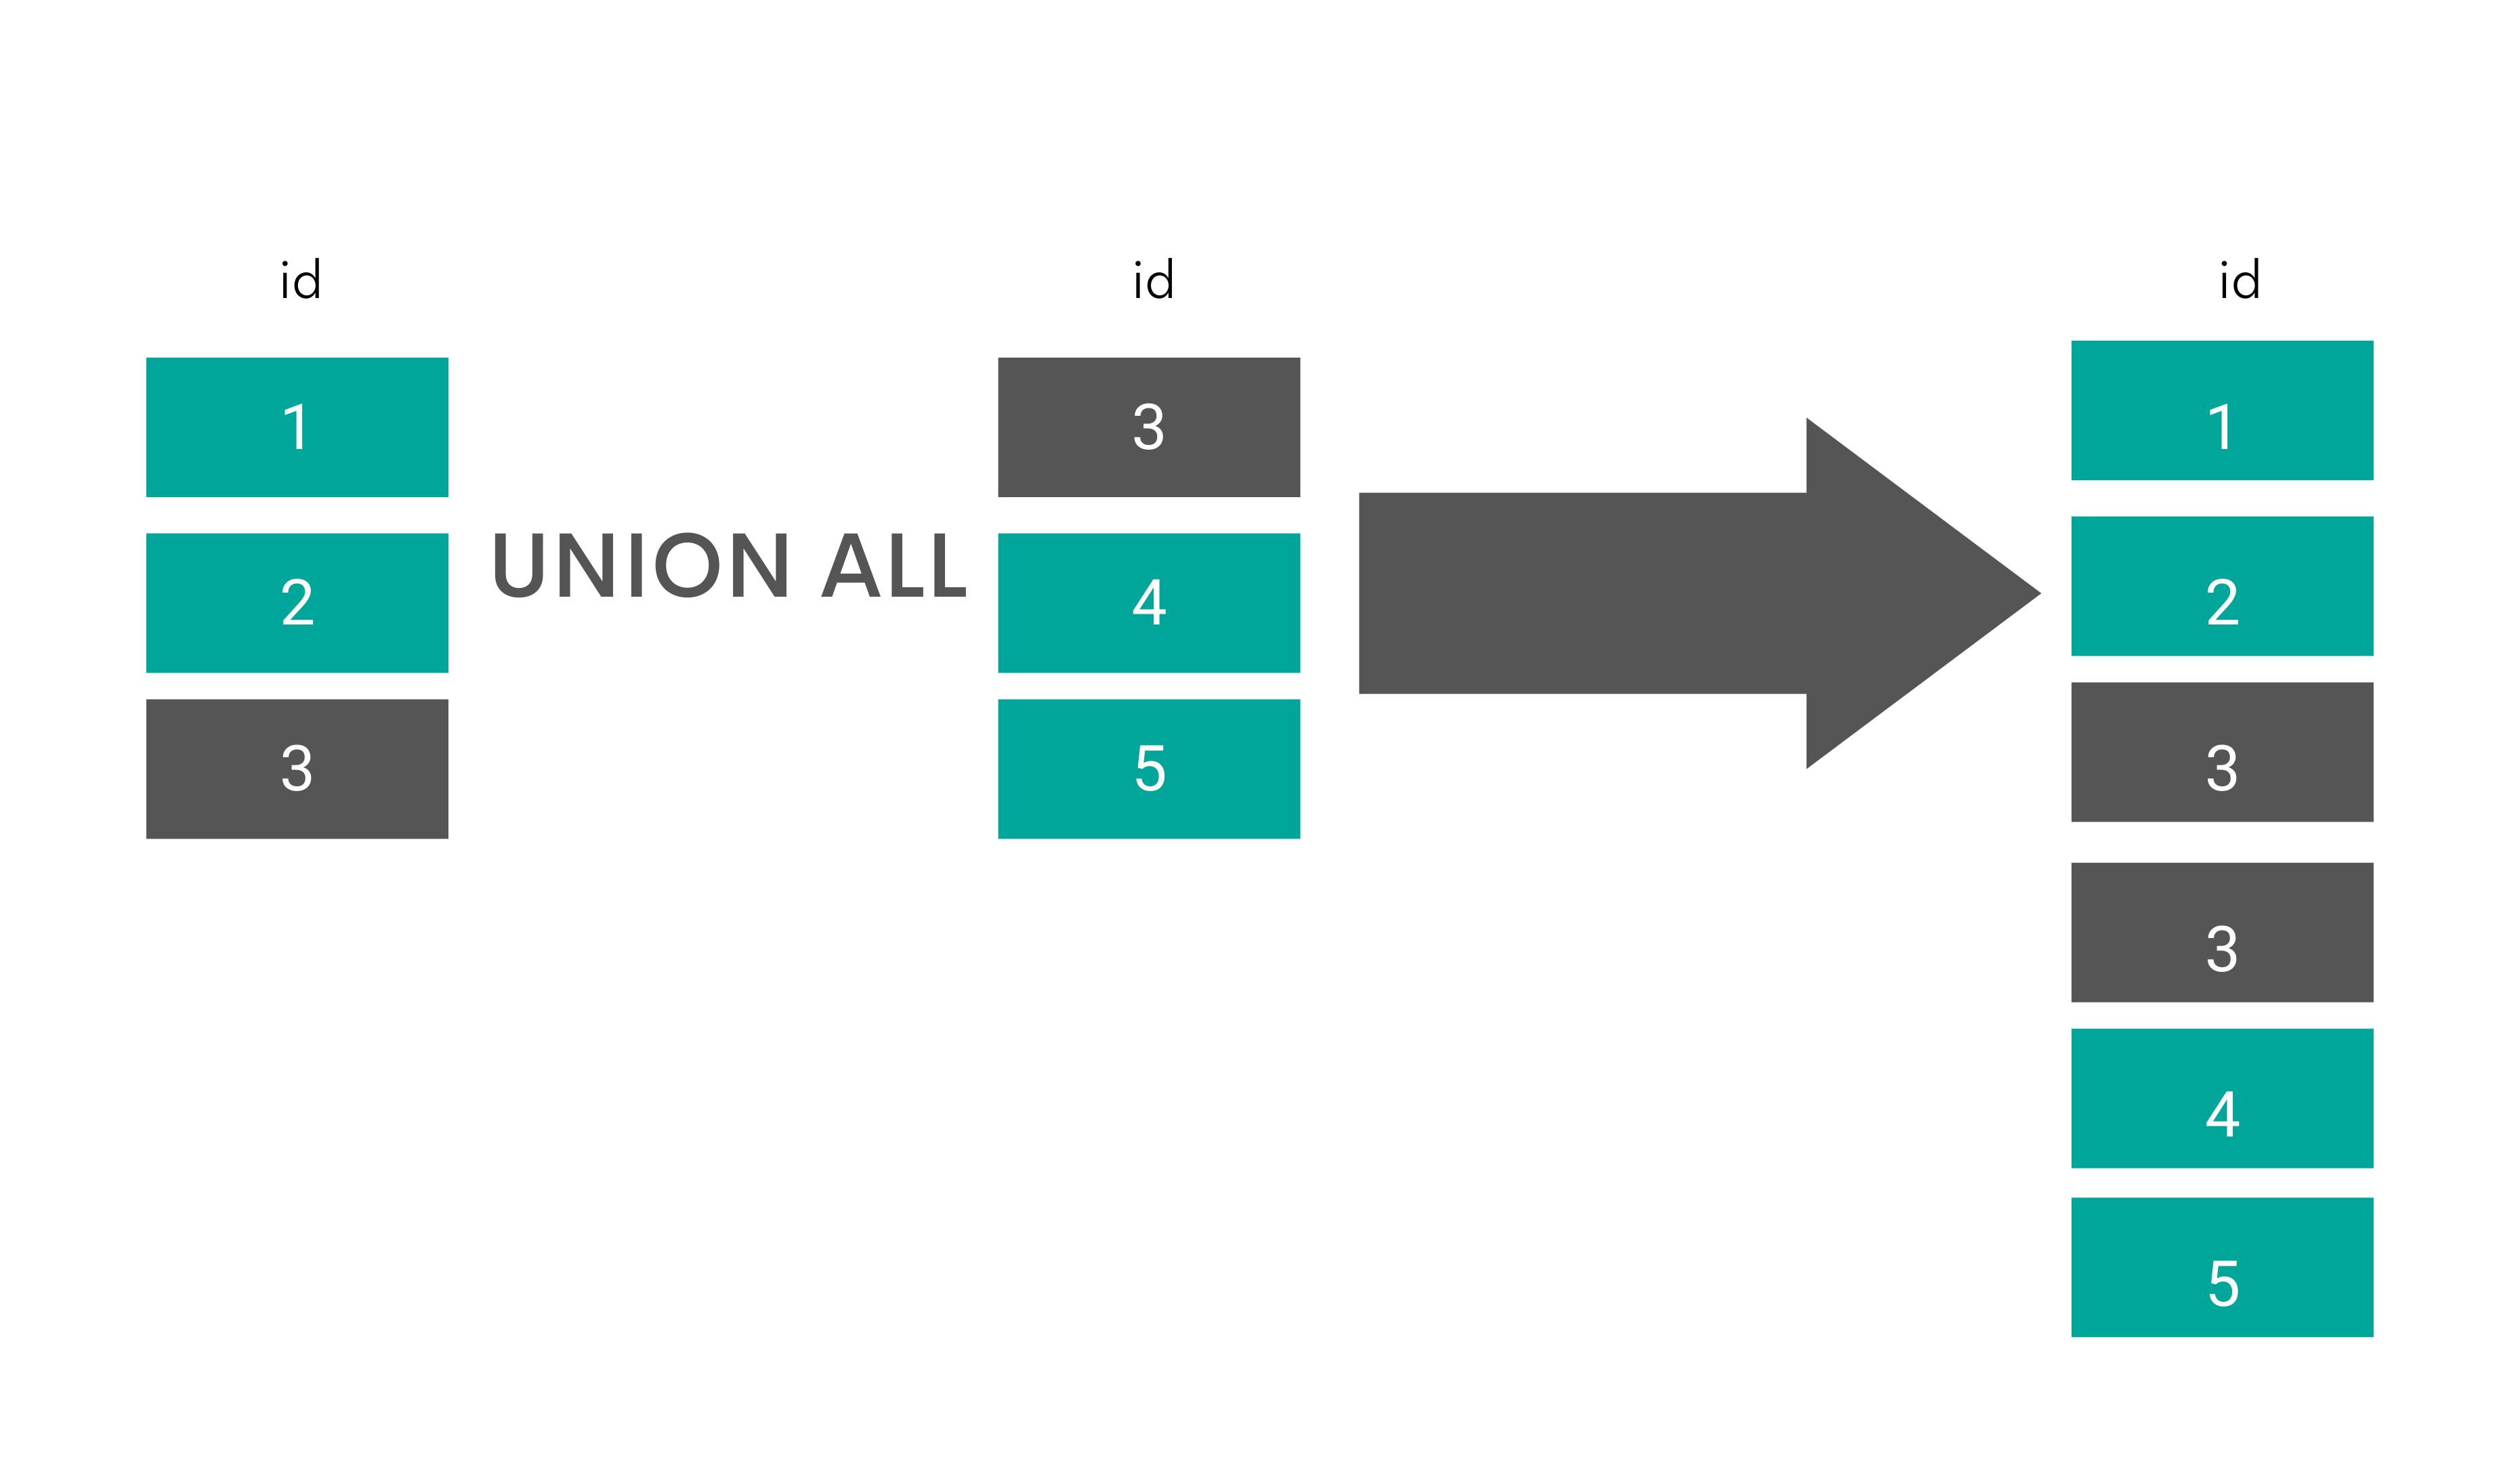 UNION ALL in SQL Cheat Sheet